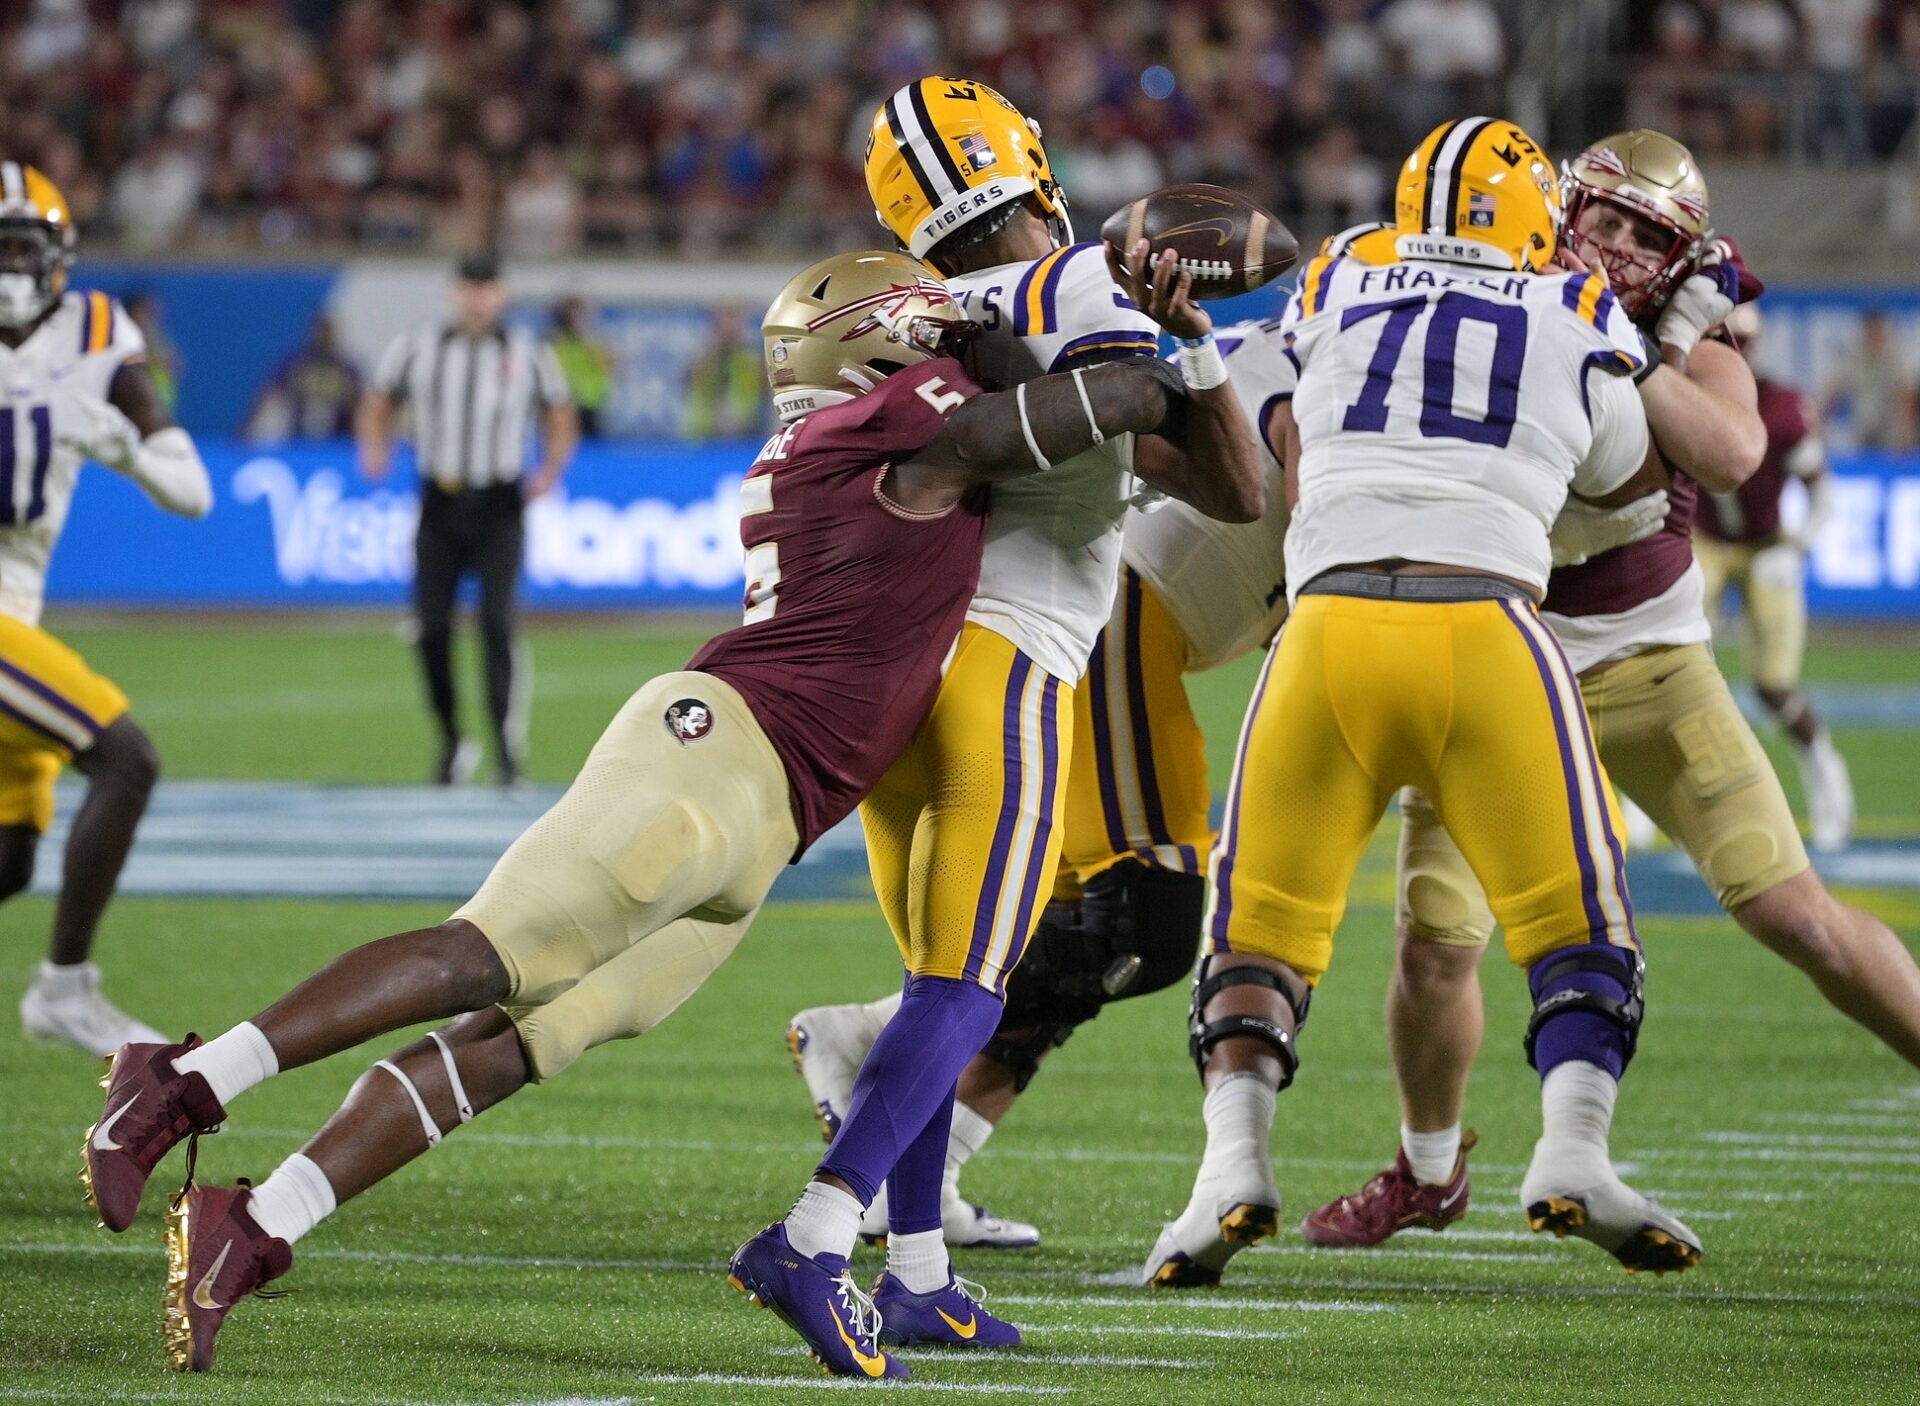 LSU Tigers quarterback Jayden Daniels (5) is sacked by Florida State Seminoles defensive end Jared Verse (5) during the game at Camping World Stadium.